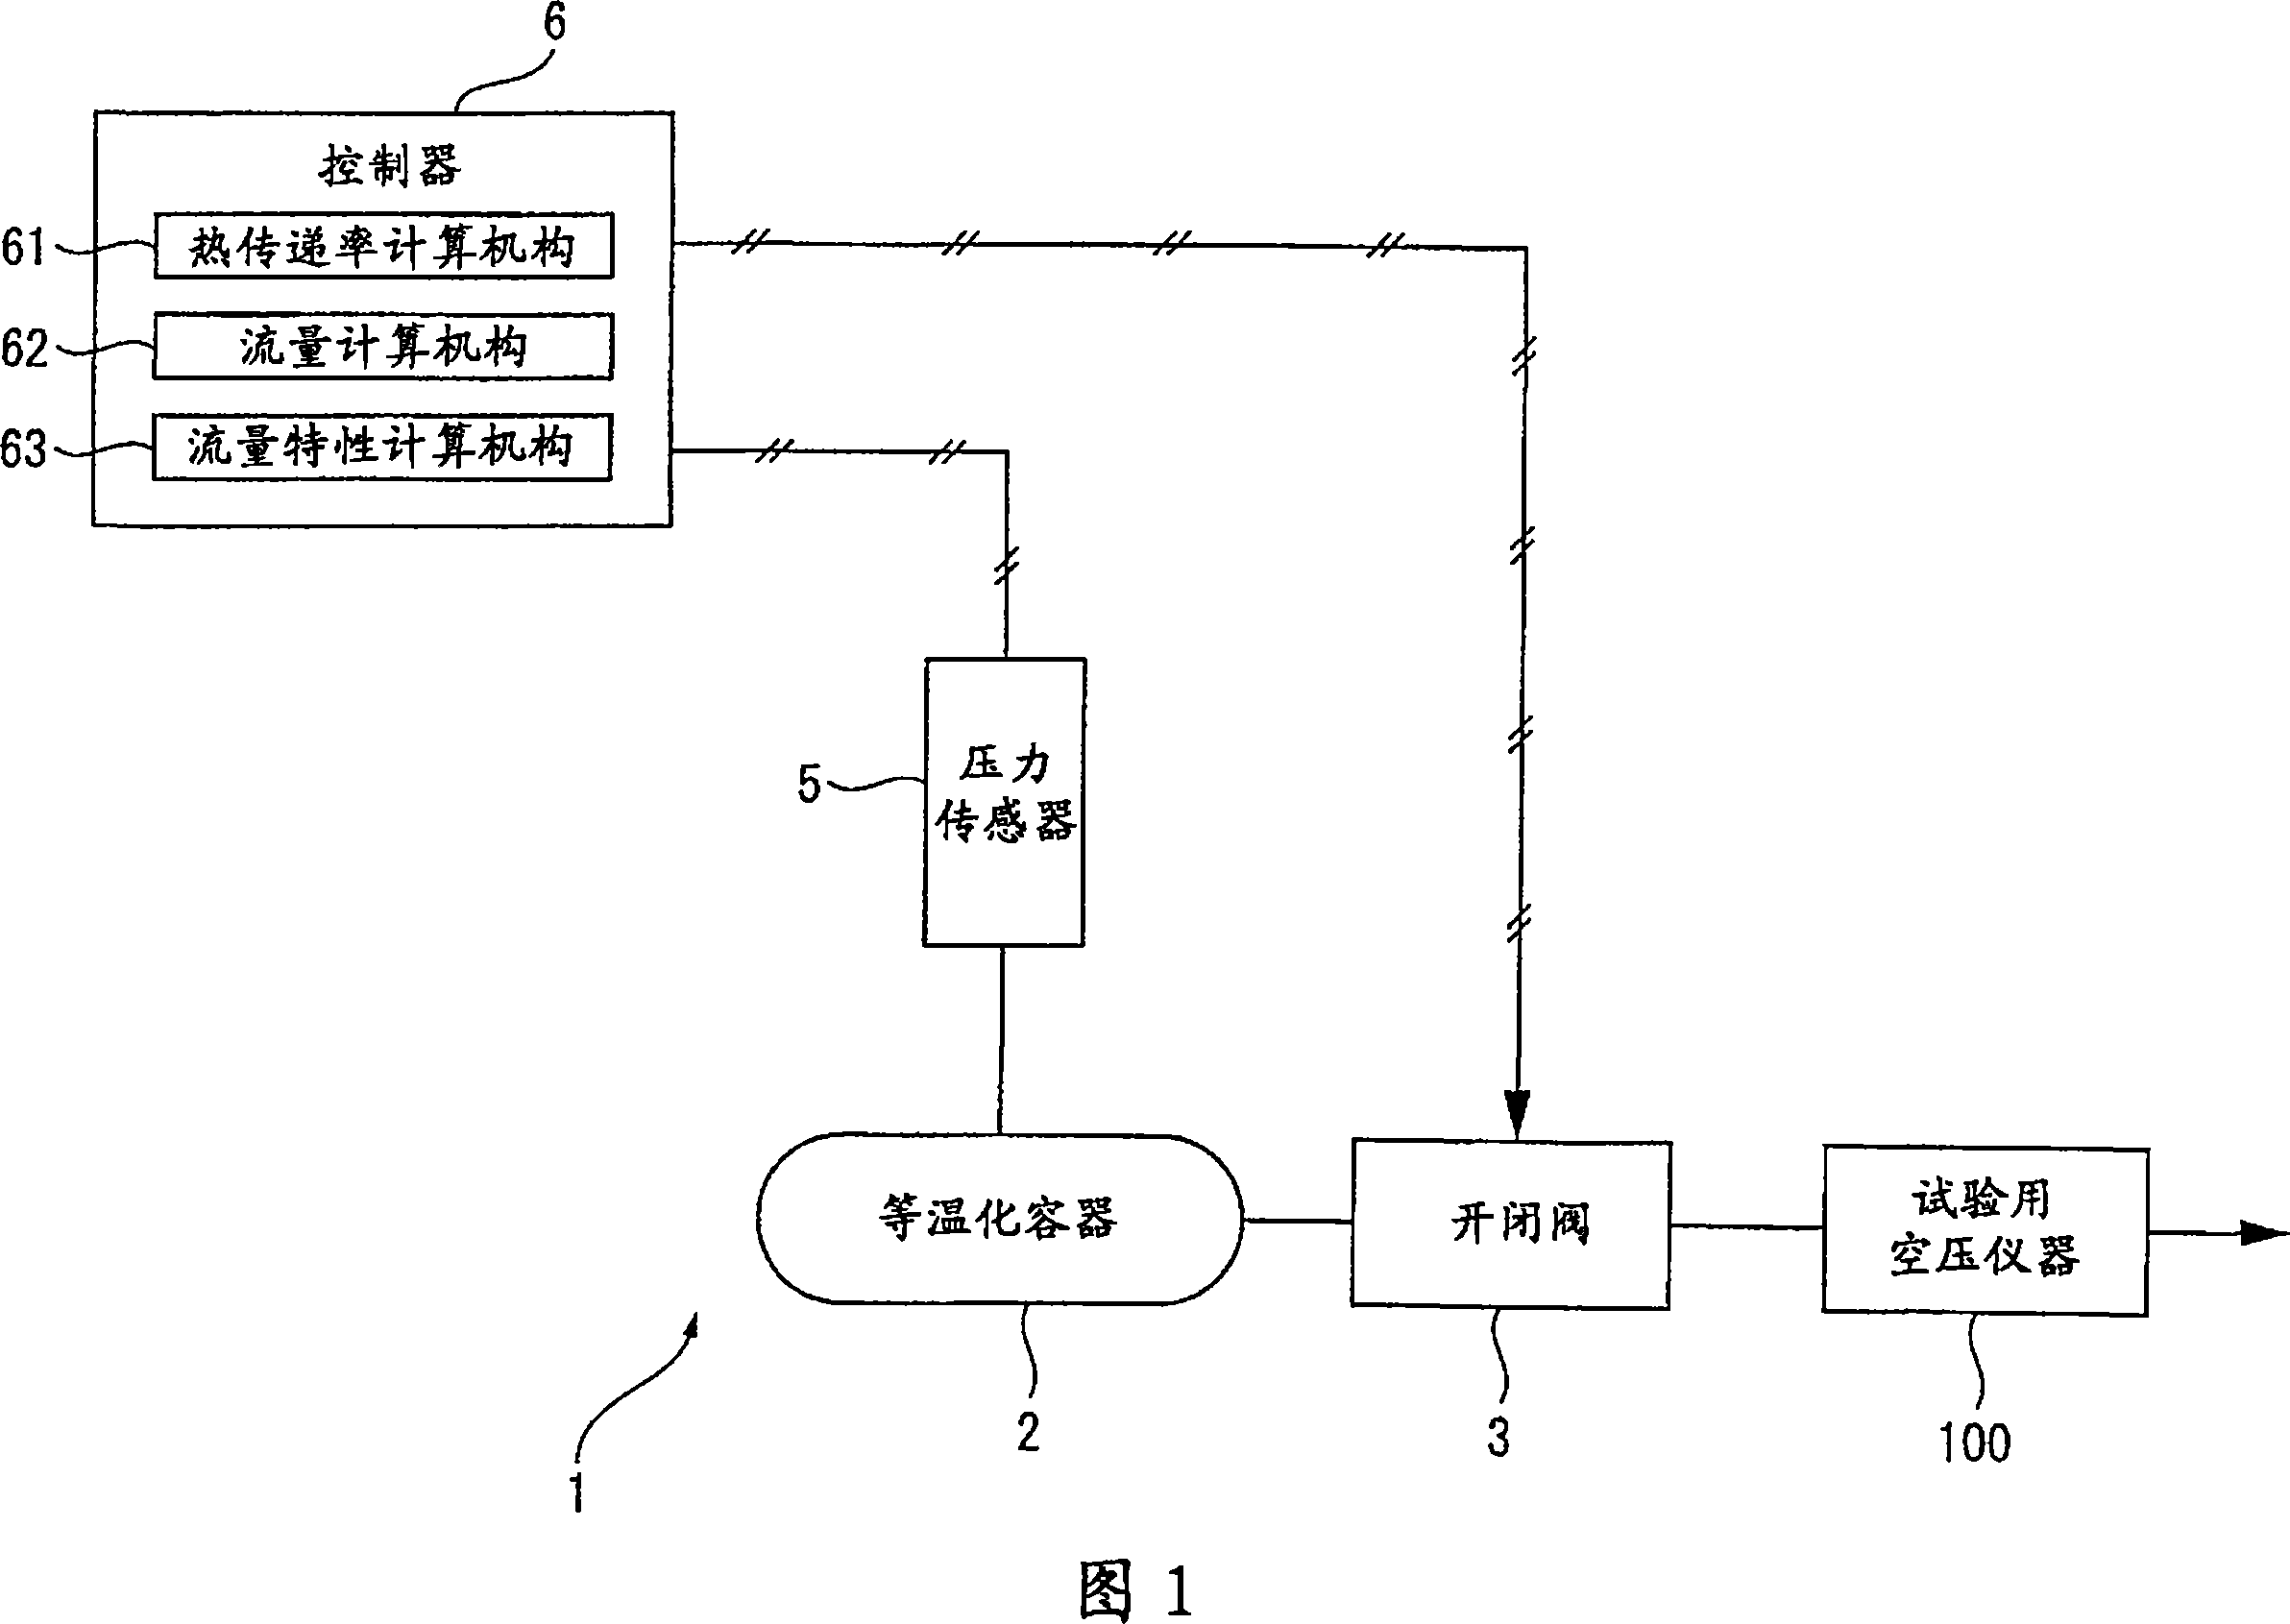 Method and device for discharge measurement